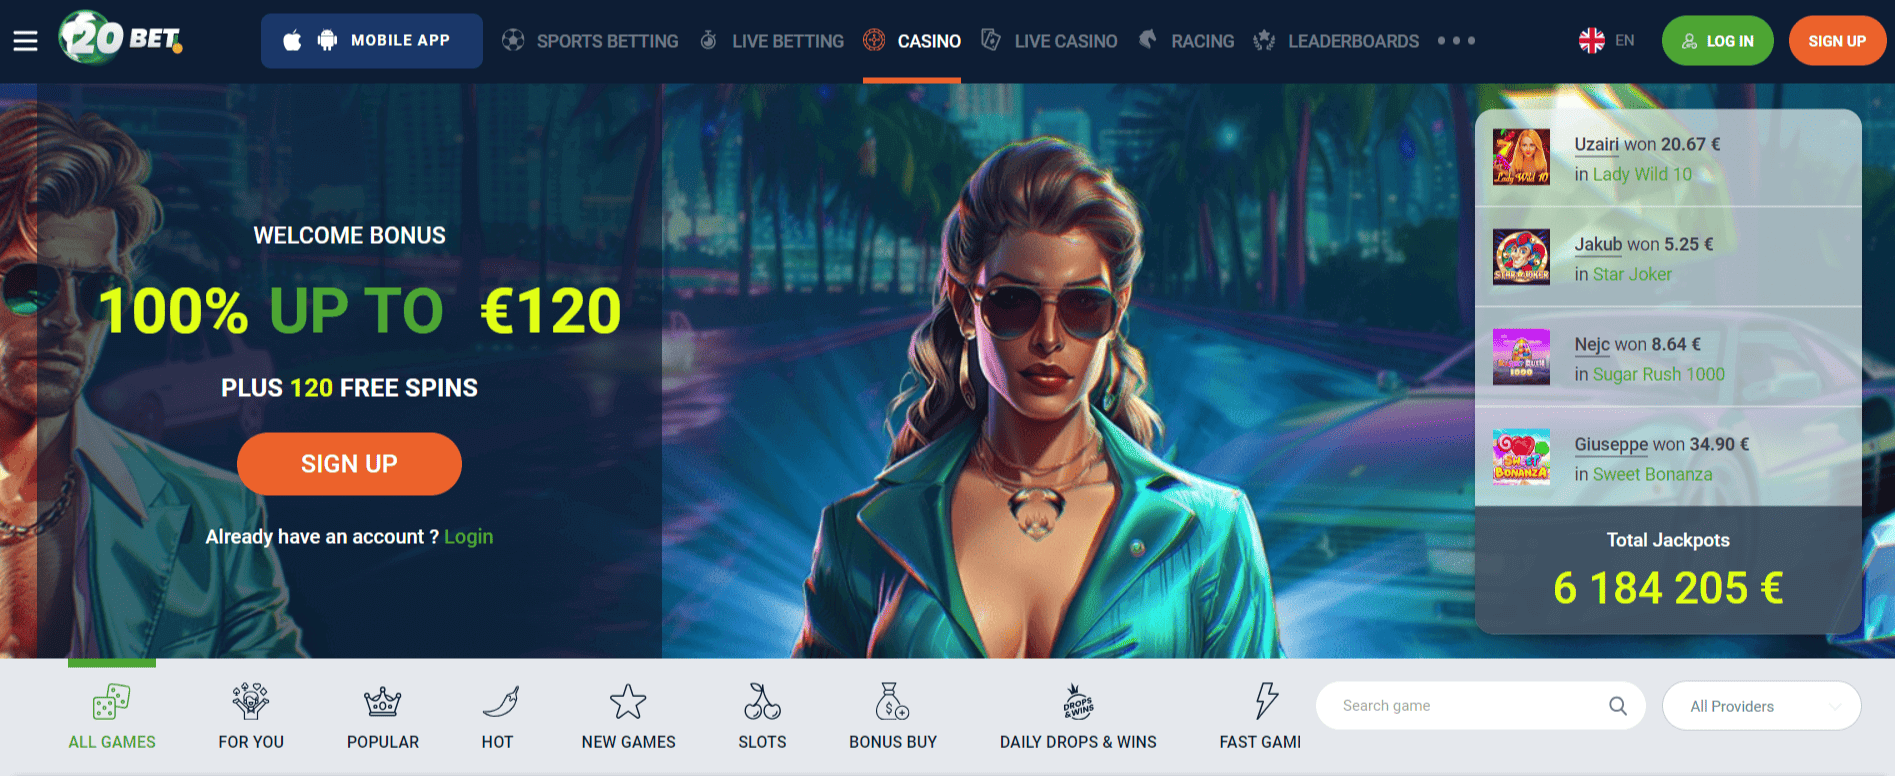 20Bet Casinbo Review